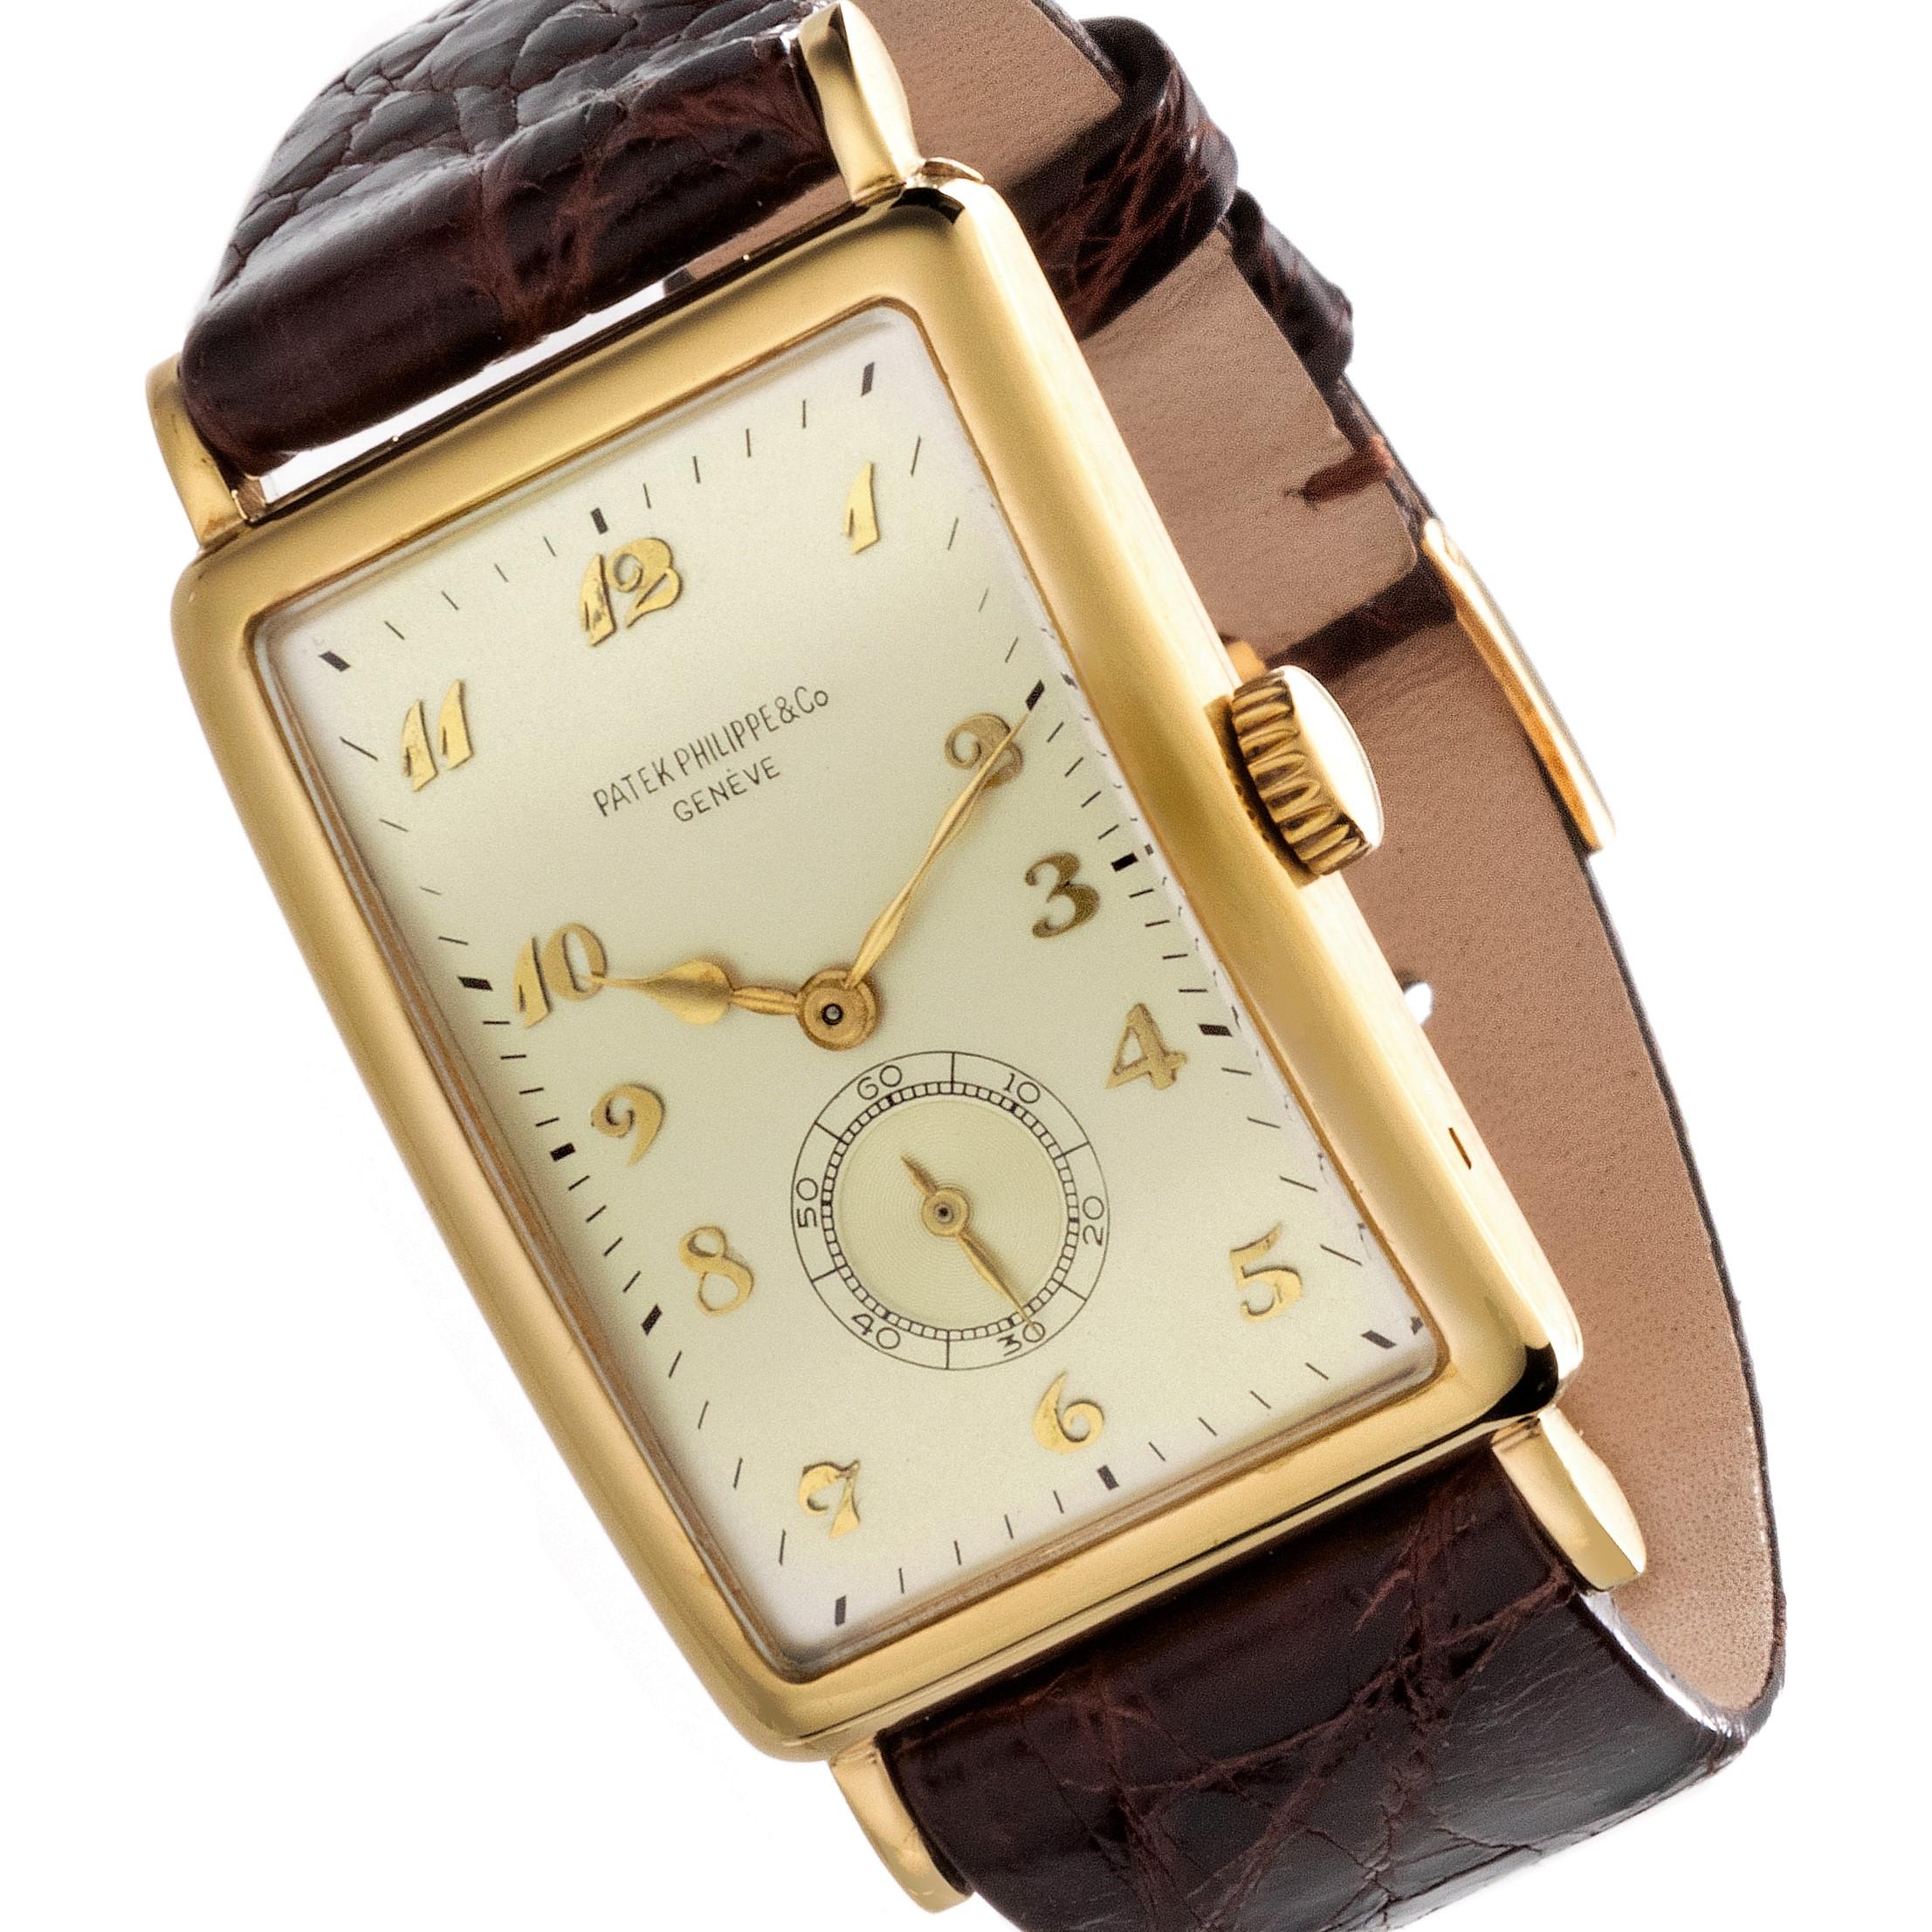 Patek Philippe 431J Extra Large Curved Rectangular Art Deco Watch In Excellent Condition For Sale In Santa Monica, CA